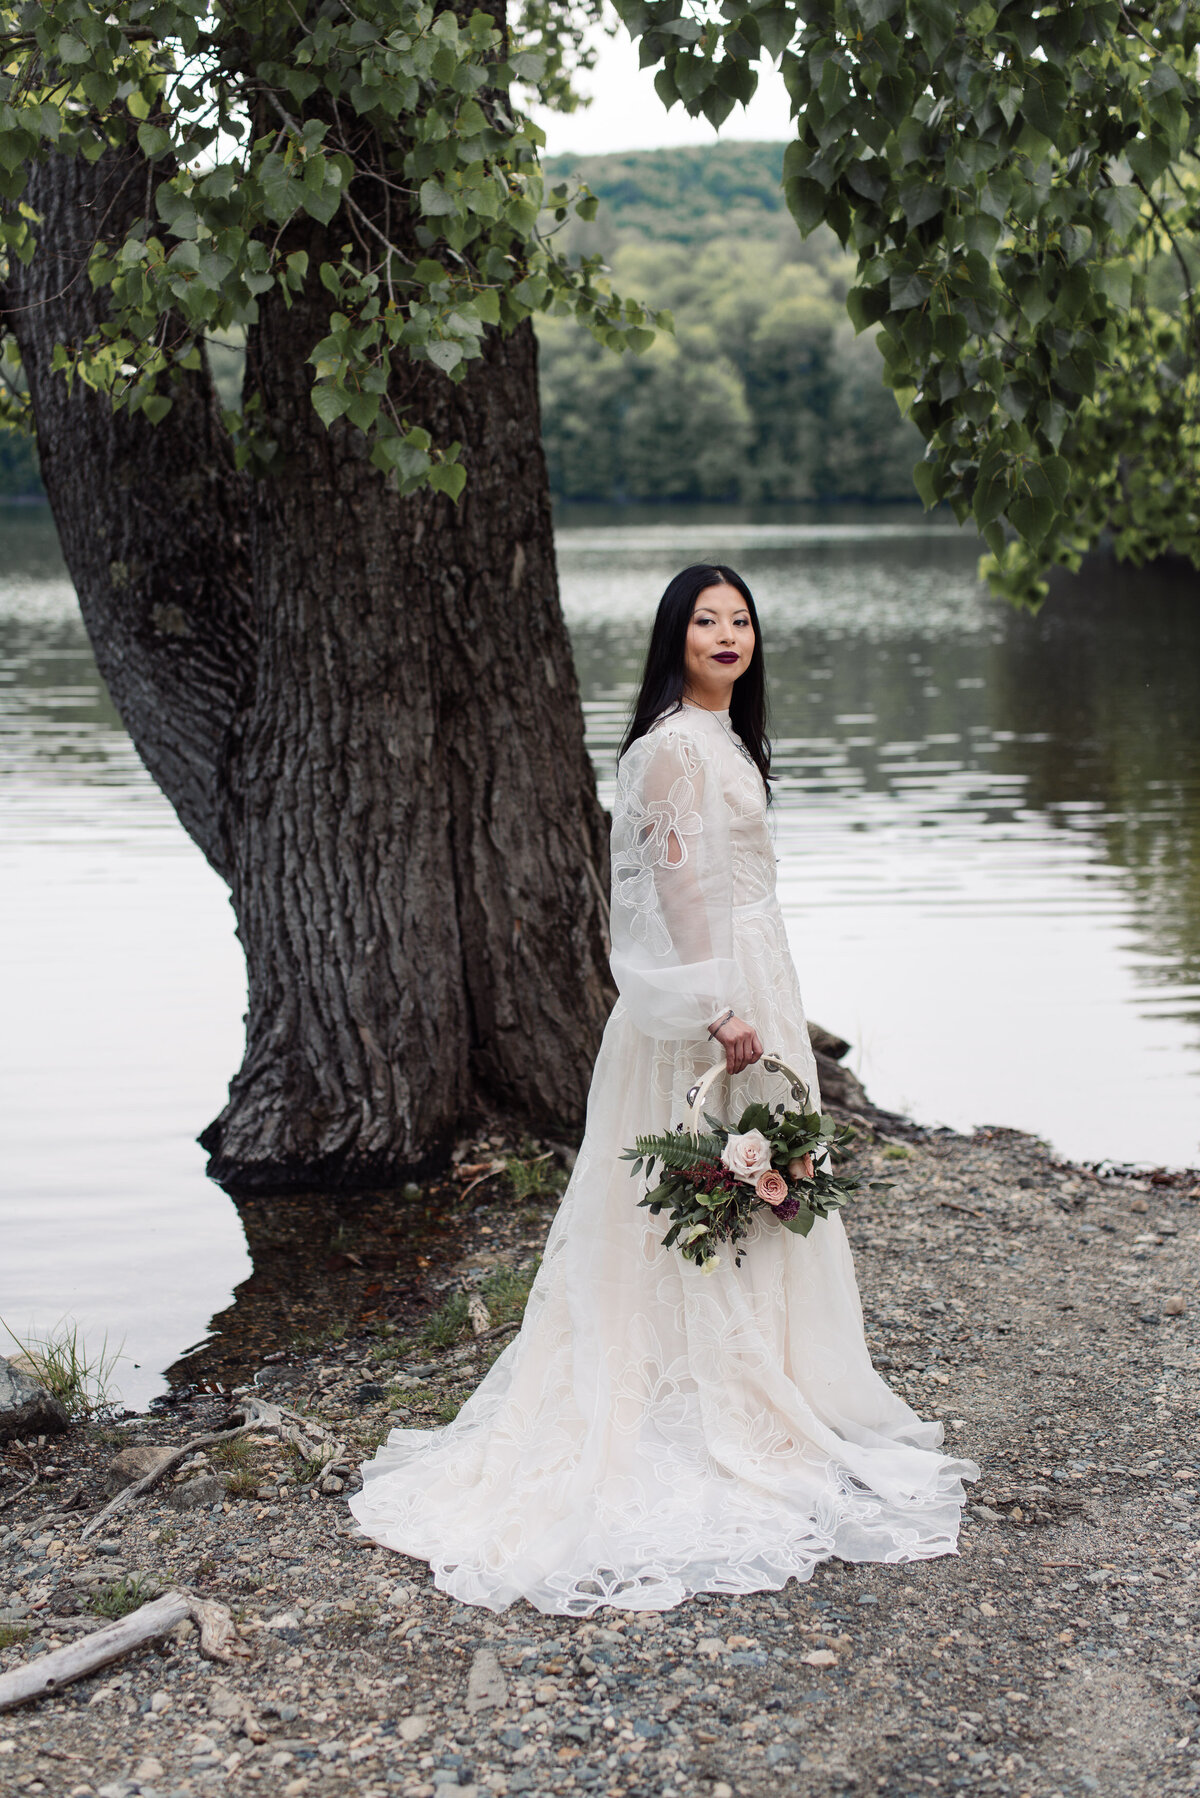 Bride wearing bespoke Daarlana wedding gown at a lake in VT. Holding tambourine bouquet by haven Floral company.